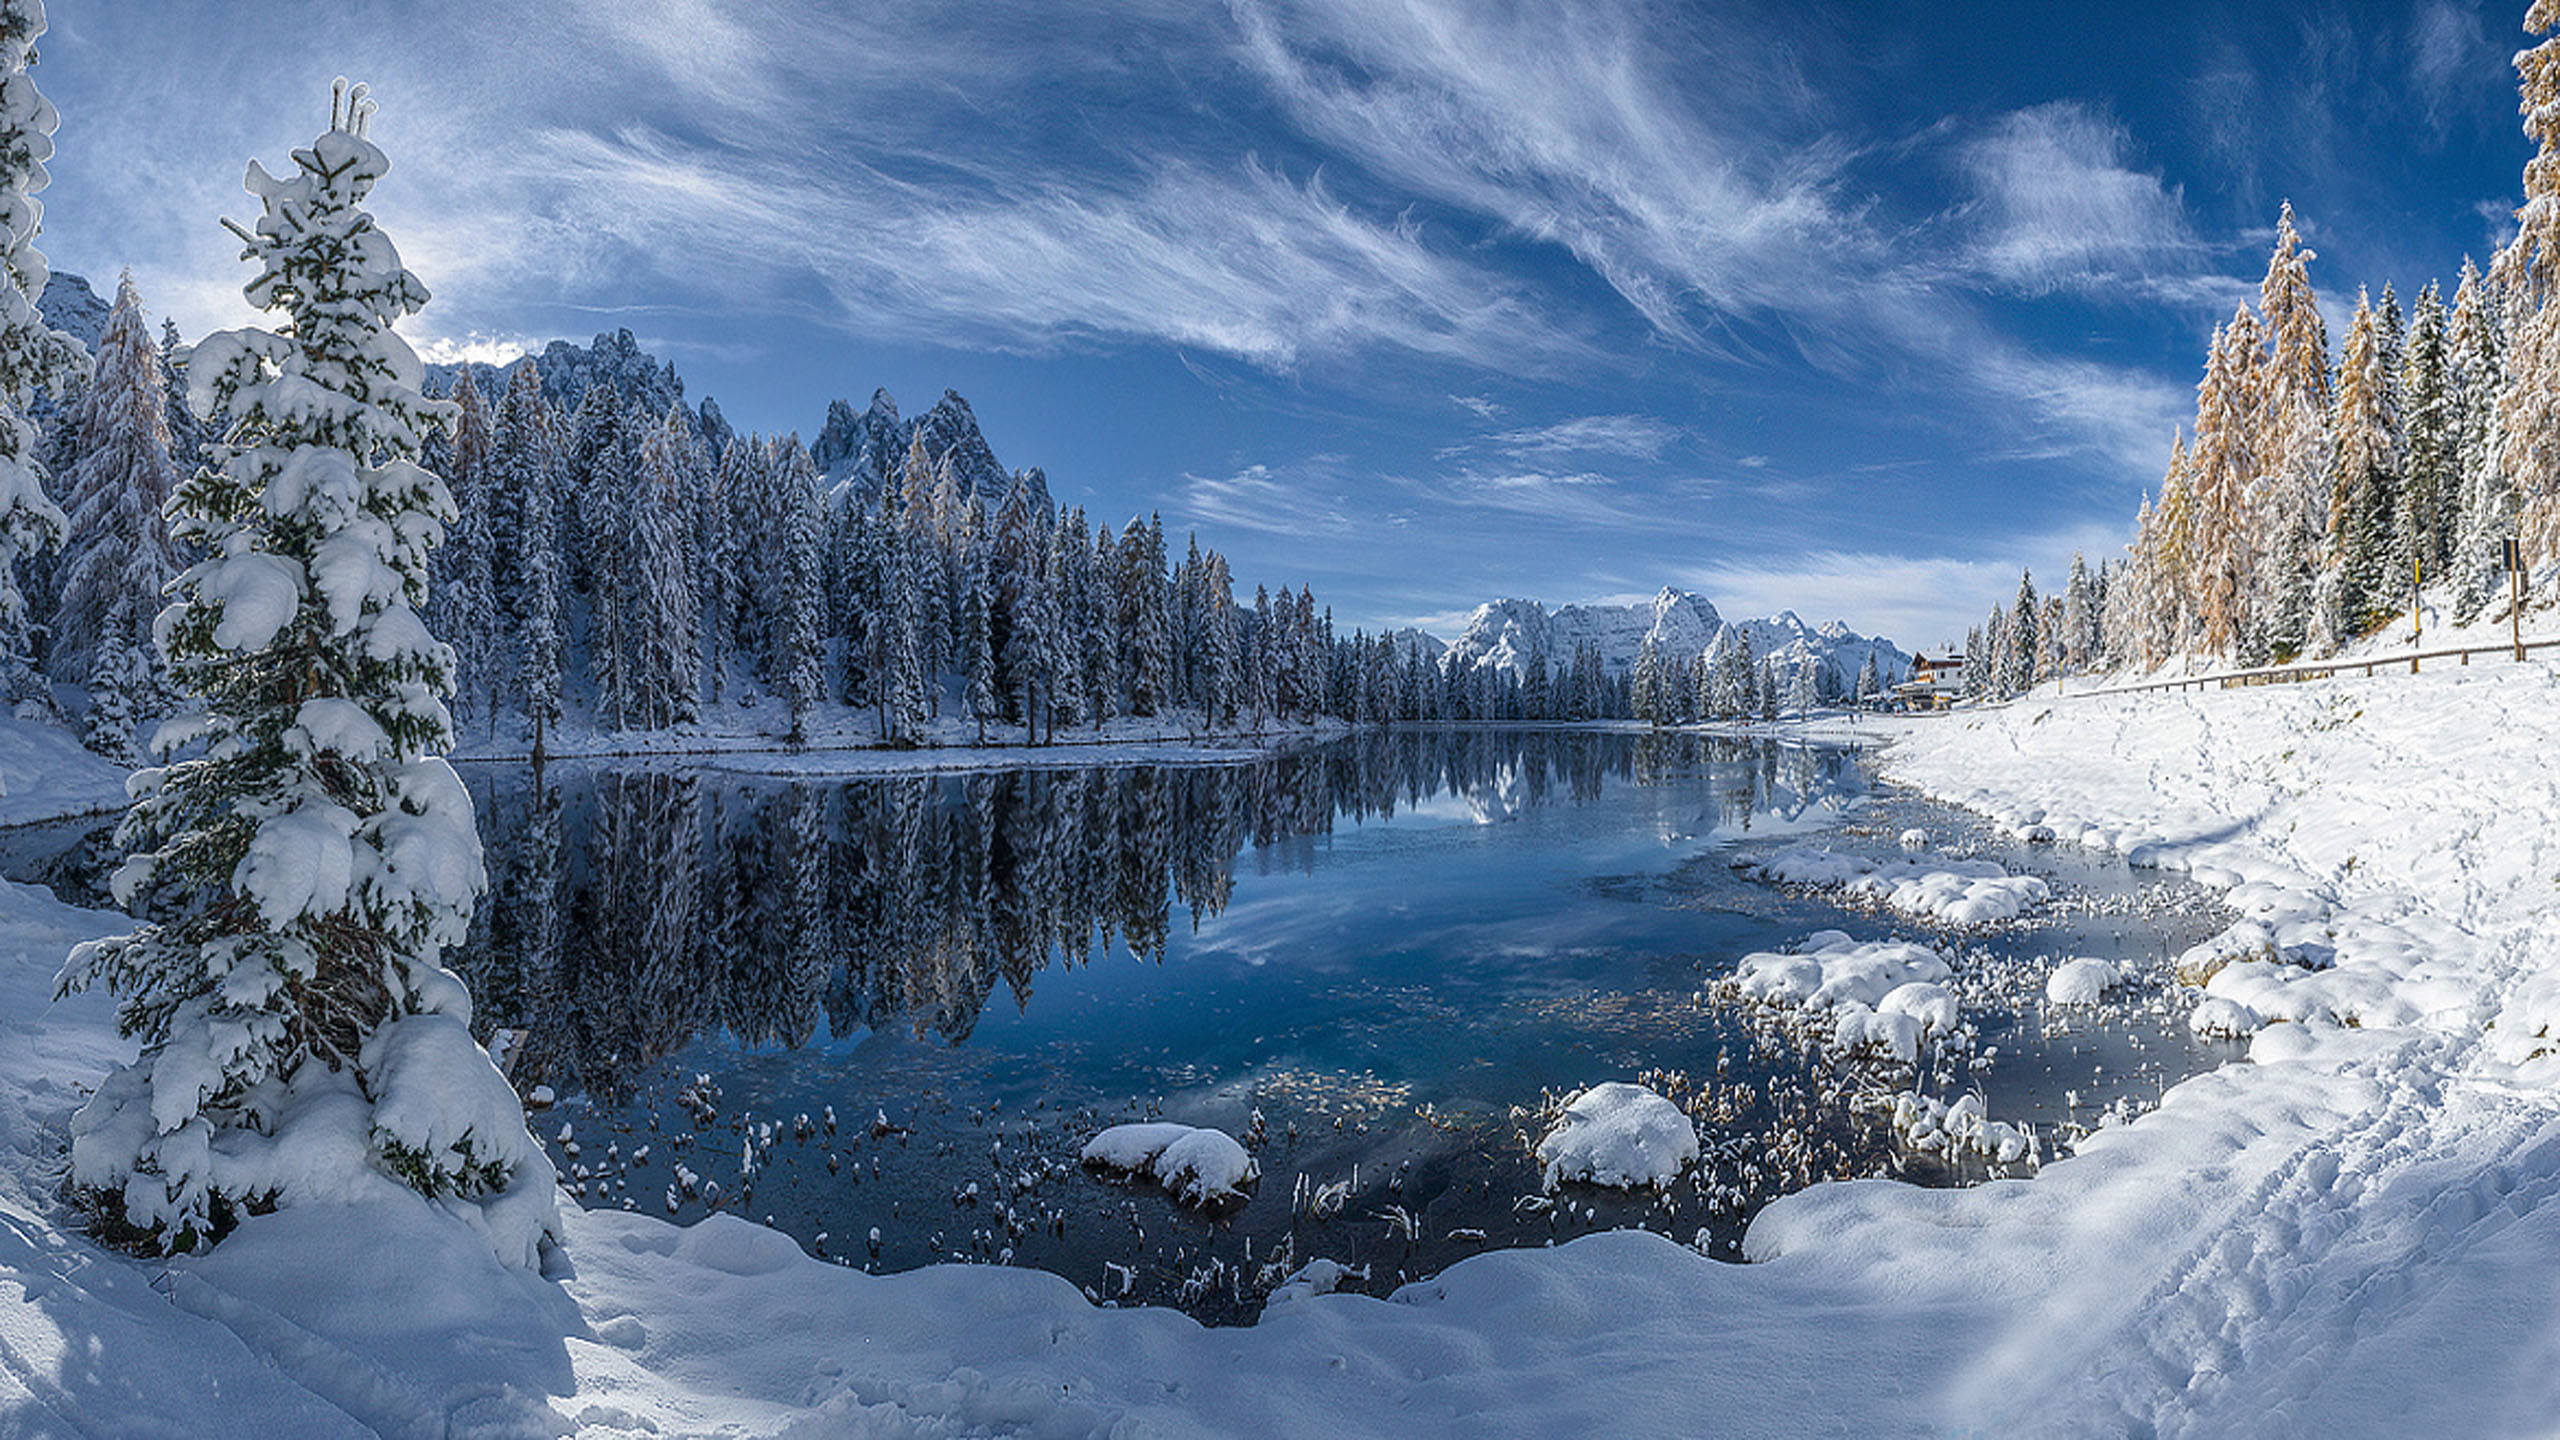 Winter Landscape Lake Reflection Pine Forest Trees With Snow White